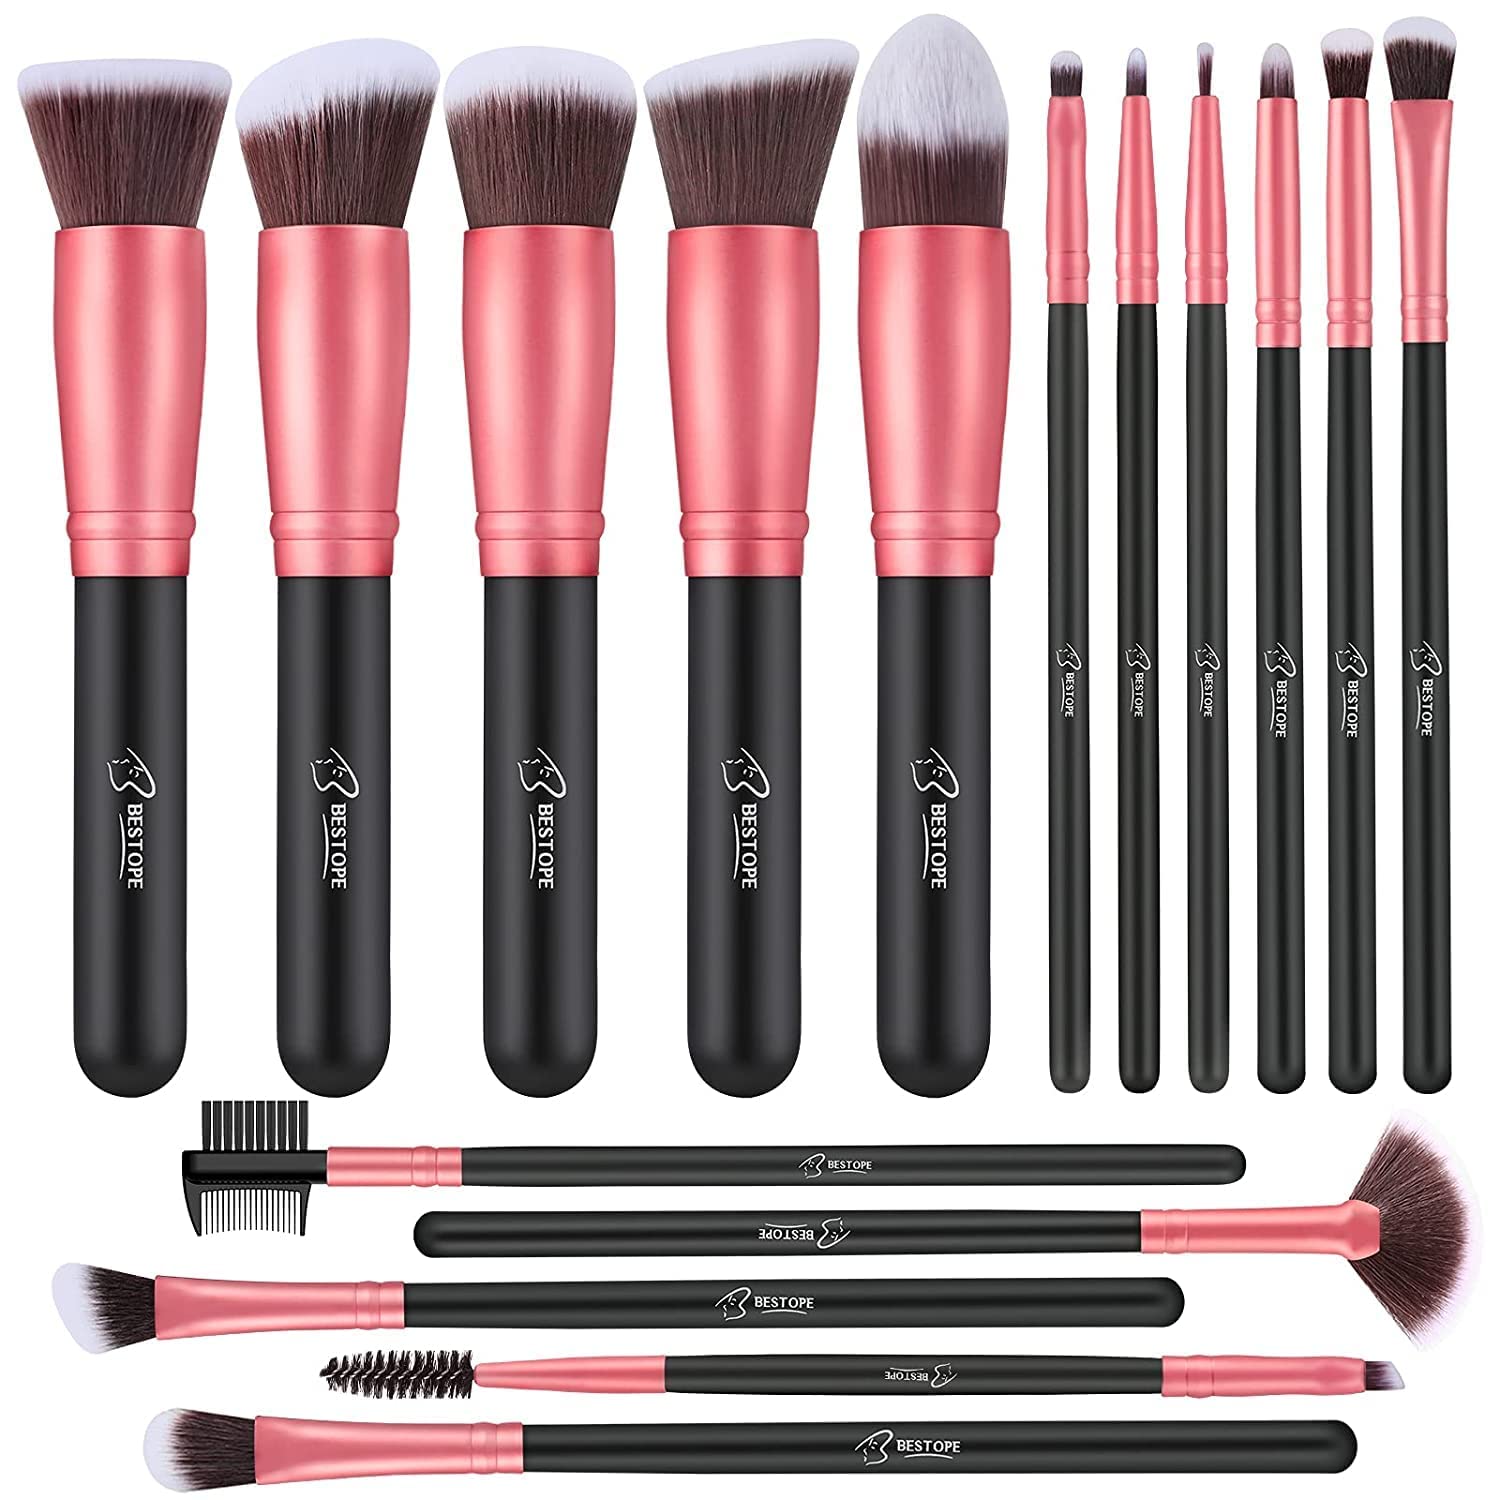 good and affordable makeup brushes